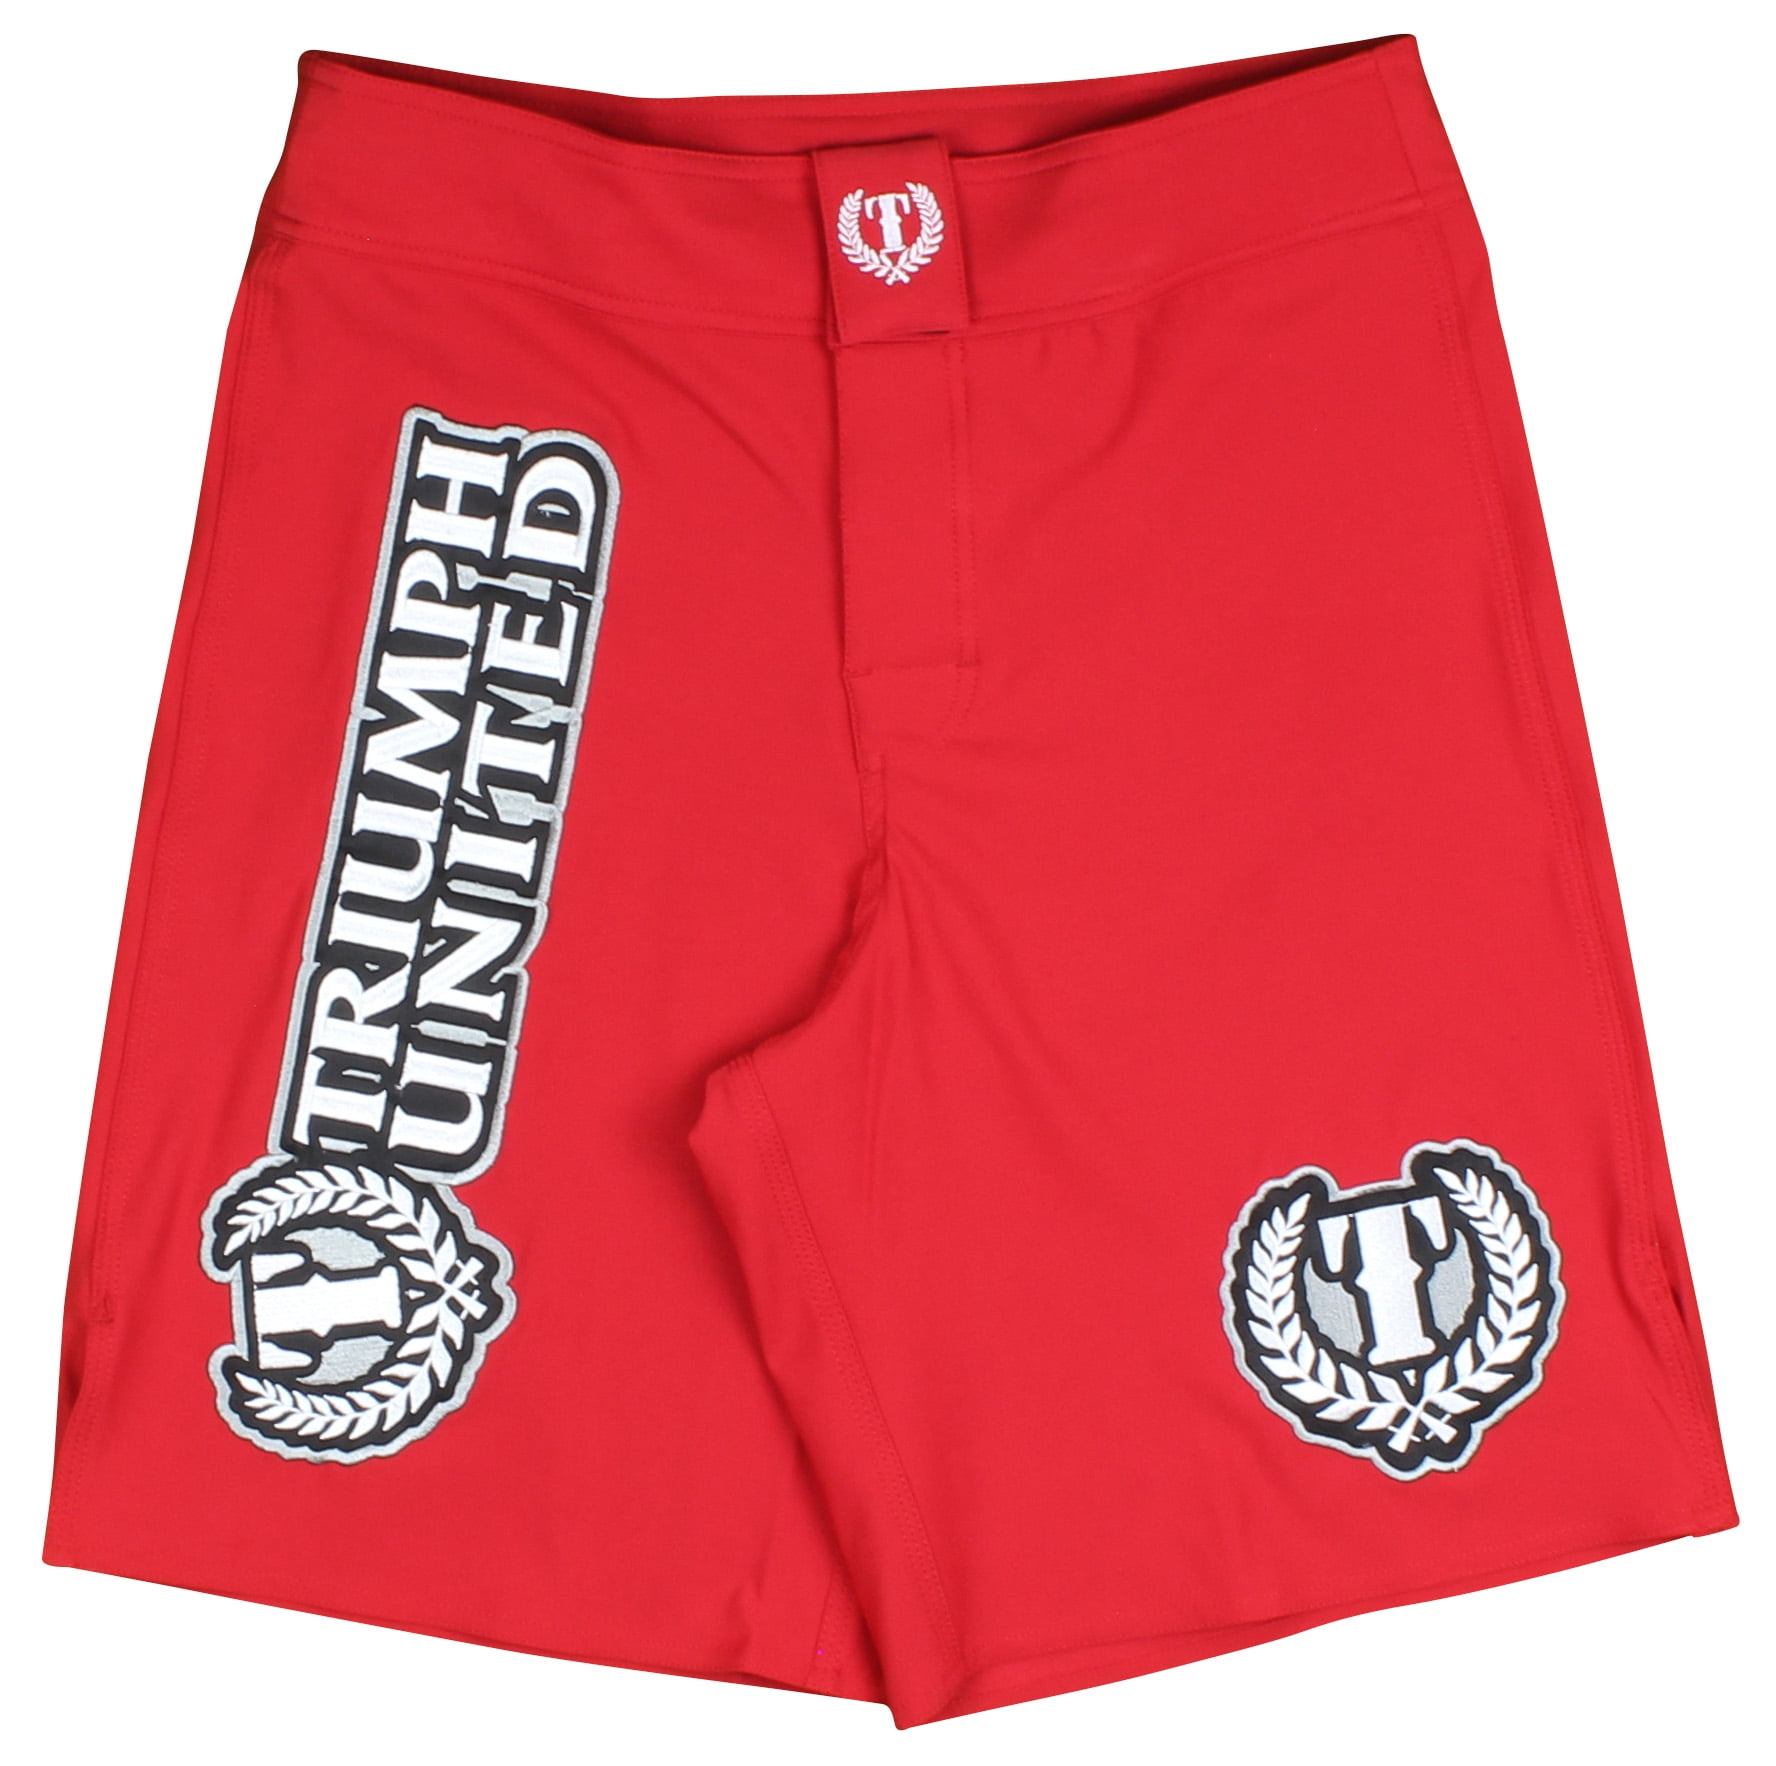 Triumph United Mens Saber Fight Shorts - Red